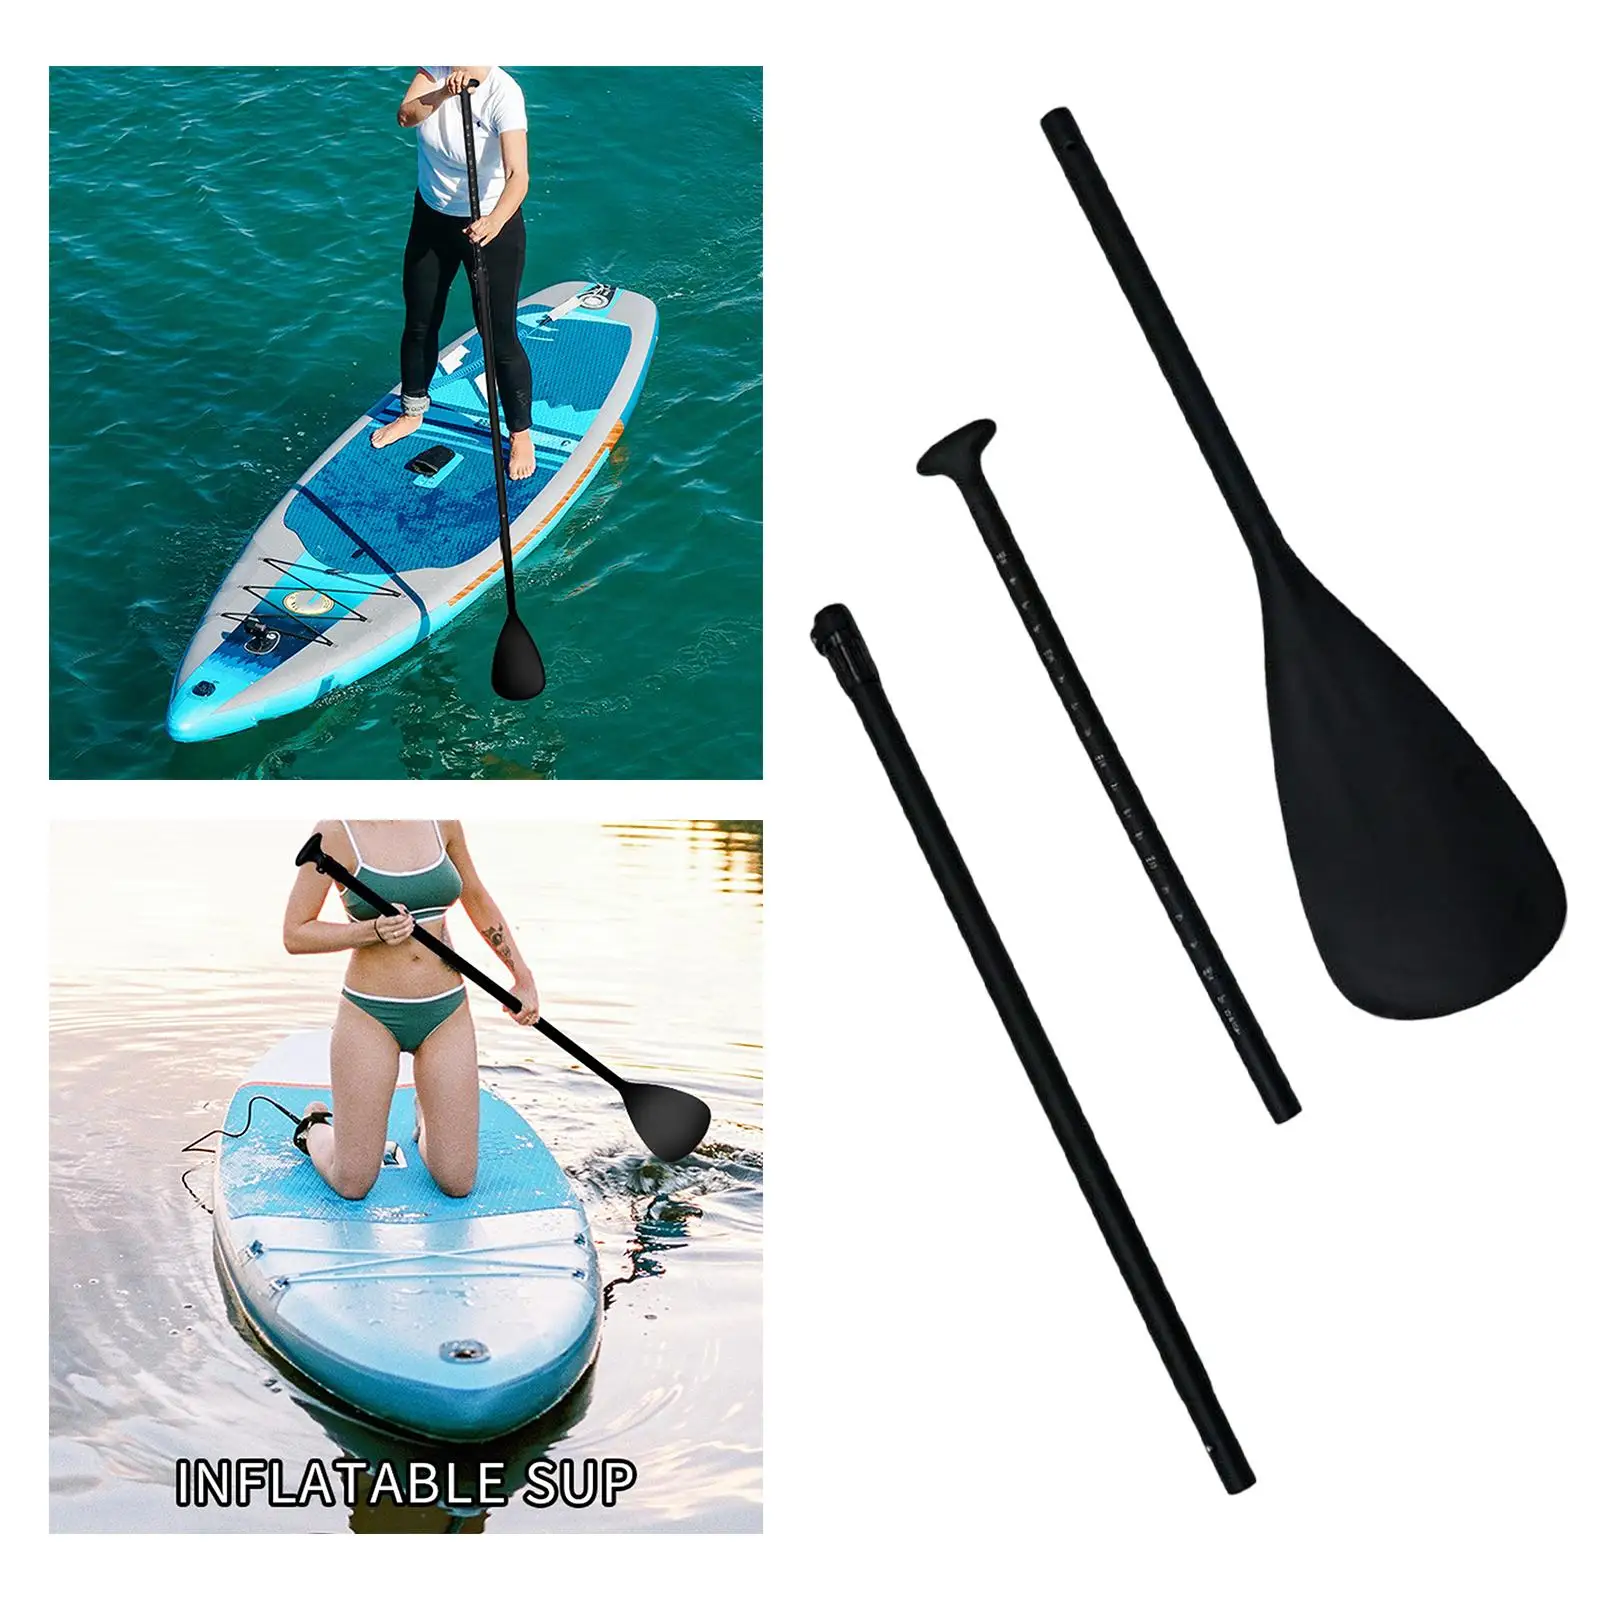 3 Sections Kayak Paddle Detachable Adjustable Durable Surfing Paddle for Surfboard Paddle Boarding Accessories Kayak